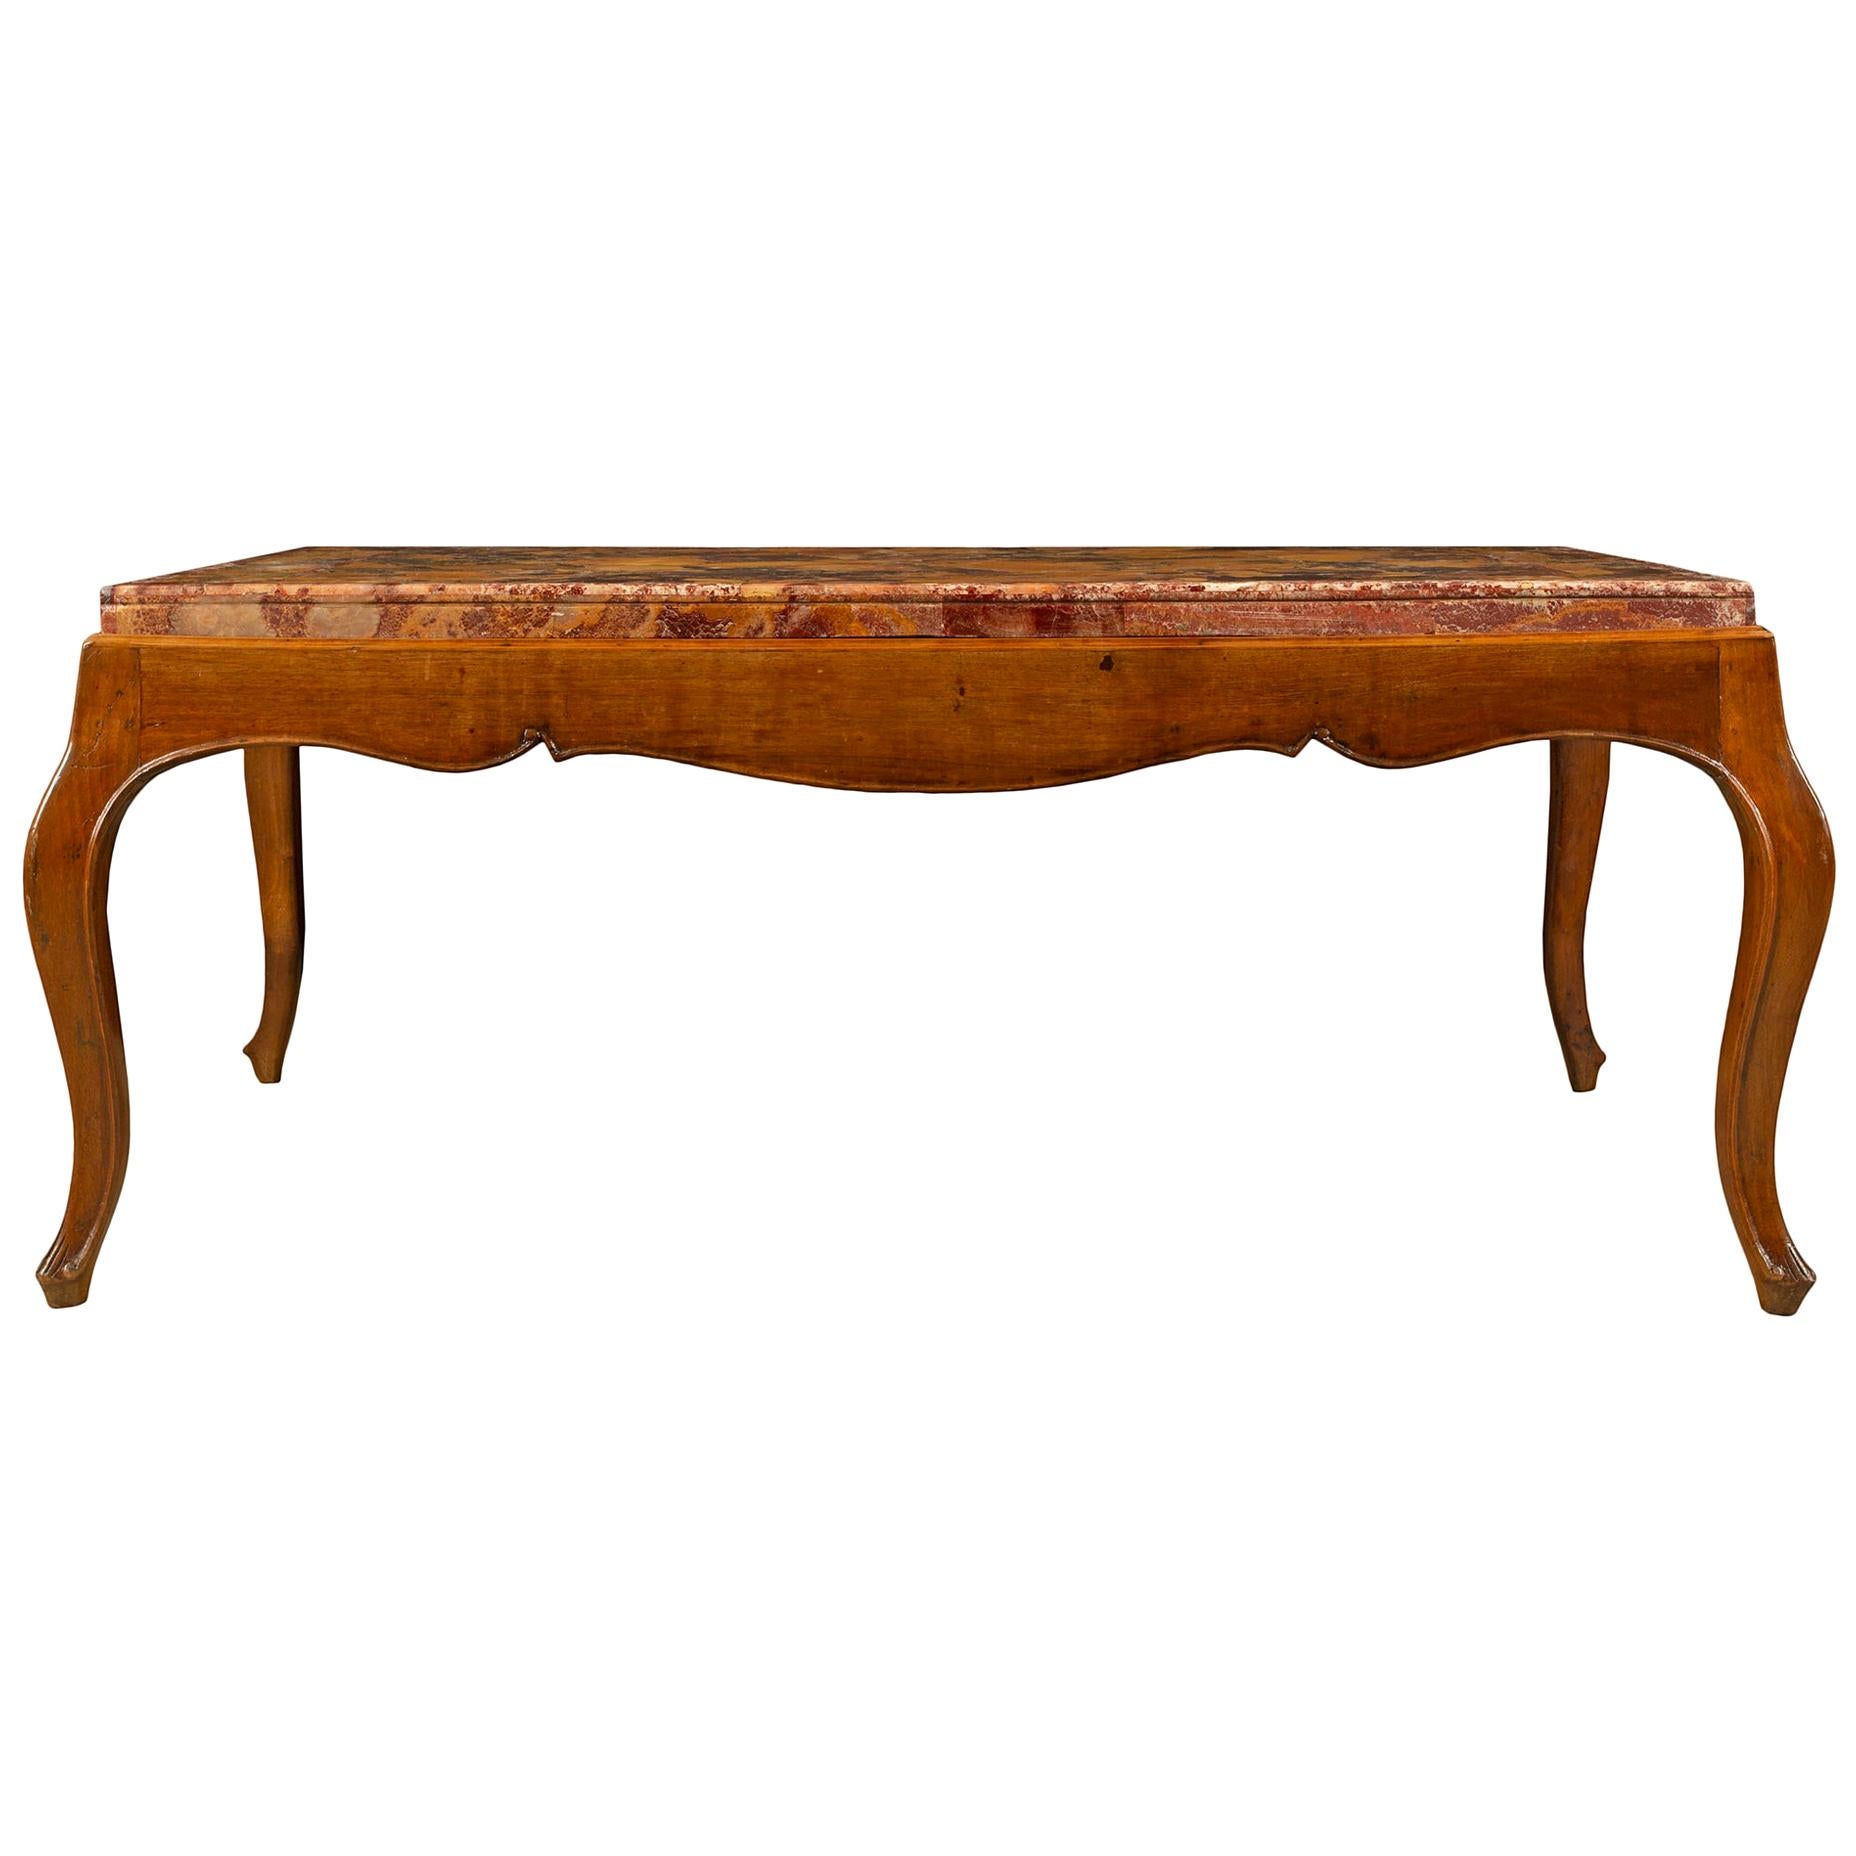 Italian 19th Century Louis XV Style Walnut and Marble Coffee Table